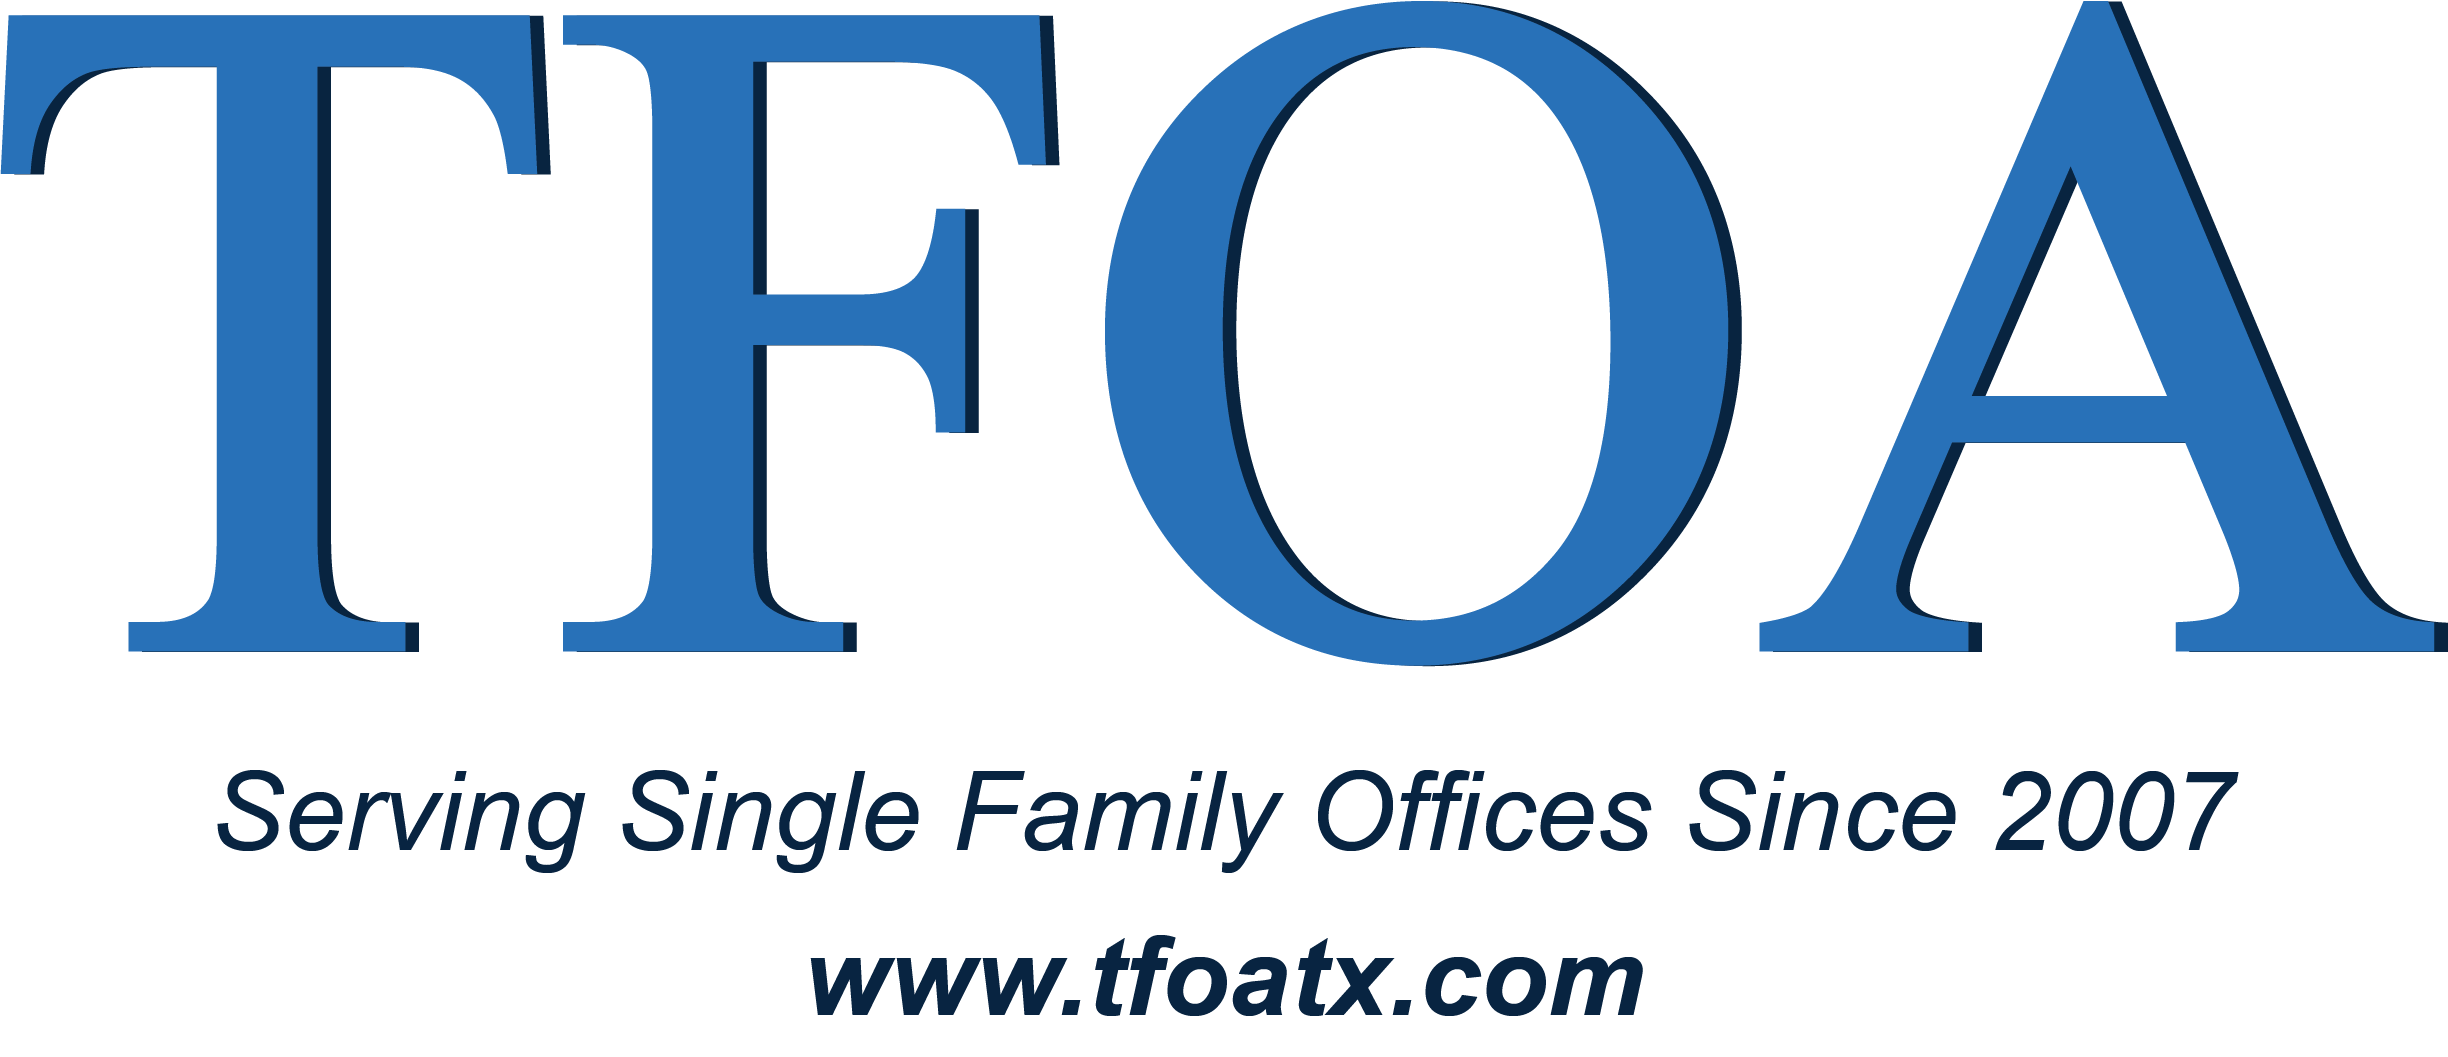 How To Staff Your Single Family Office